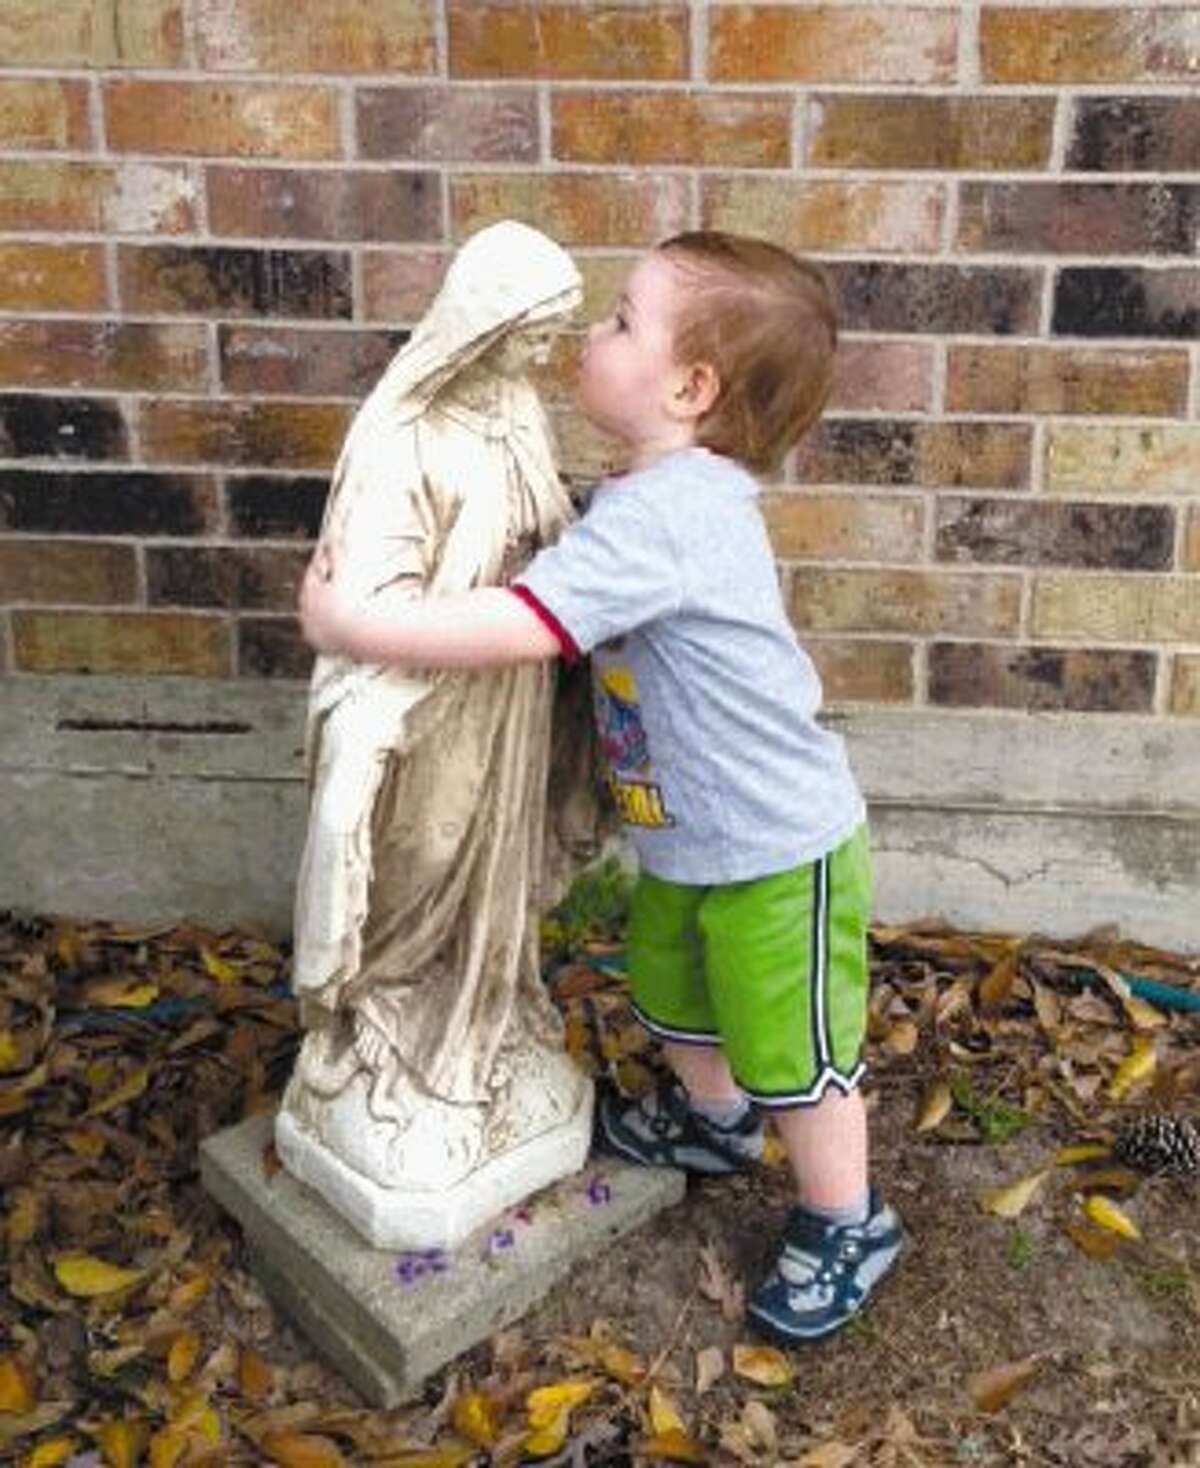 In this archive photo from March 2, 2012, 19-month-old William Barnes, V, gives Mother Mary a hug and a kiss in front of his grandmother’s home in River Plantation. Aunt Liz used her iPhone to capture the special moment.